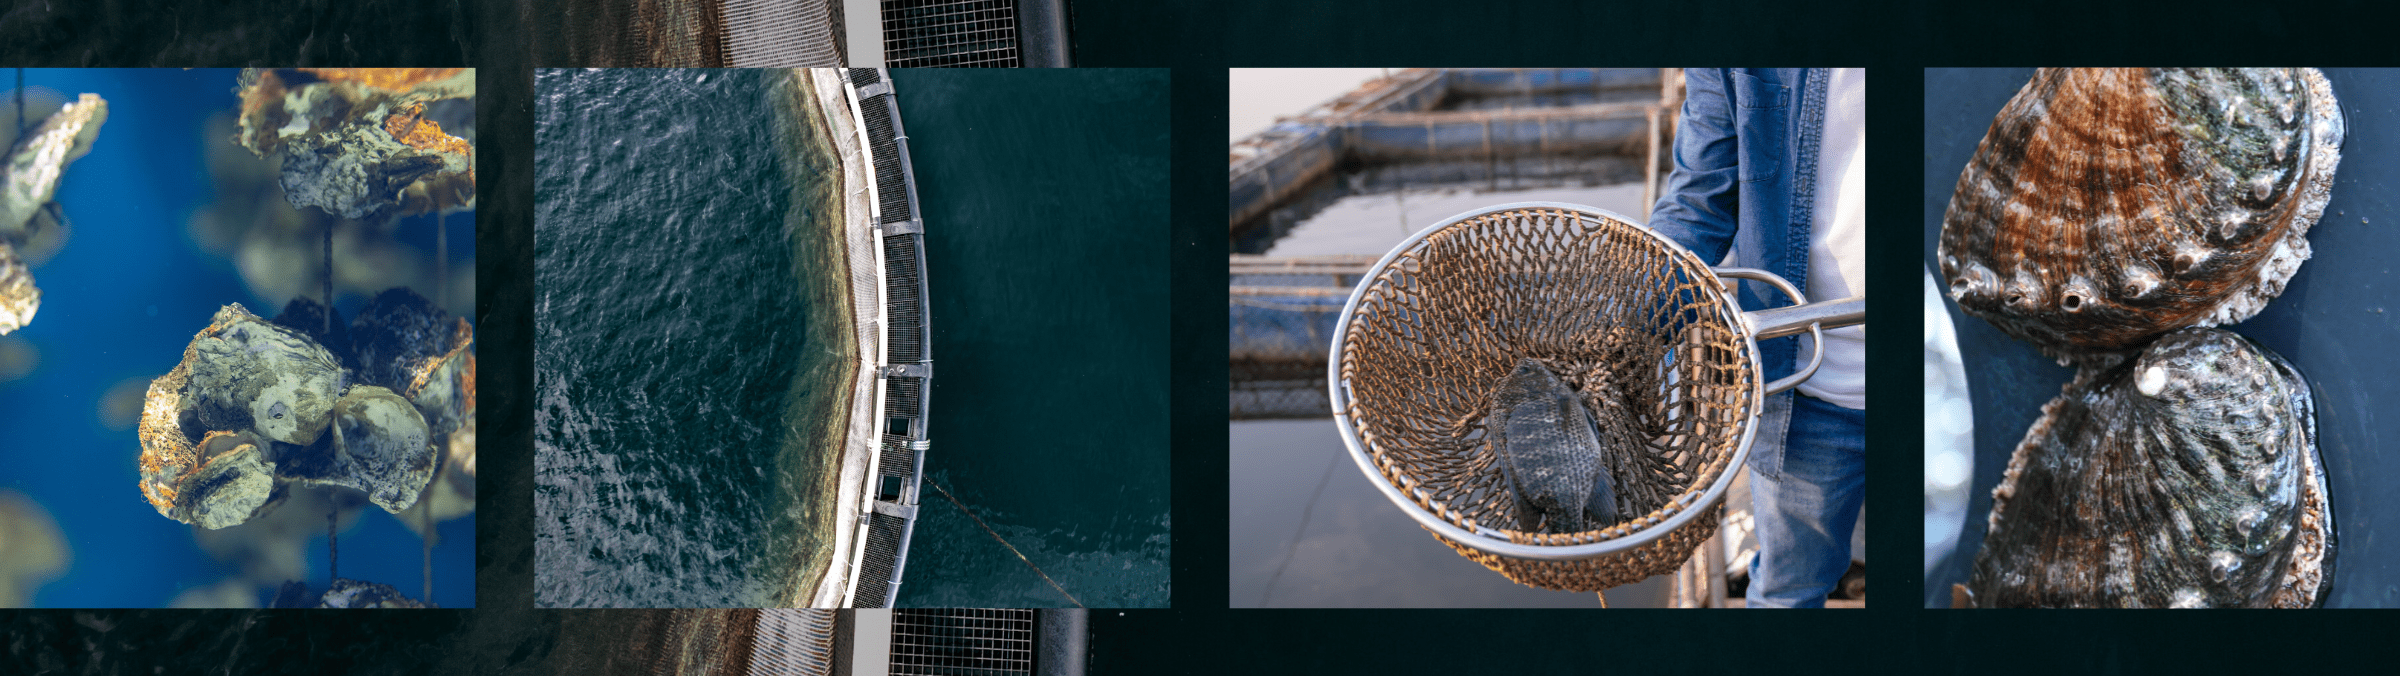 Grid-like collage featuring four photos, from left to right, oysters in a line, aerial view of an aquafarm, an aquaculture farmer holding a fish in a net, and a column of abalone